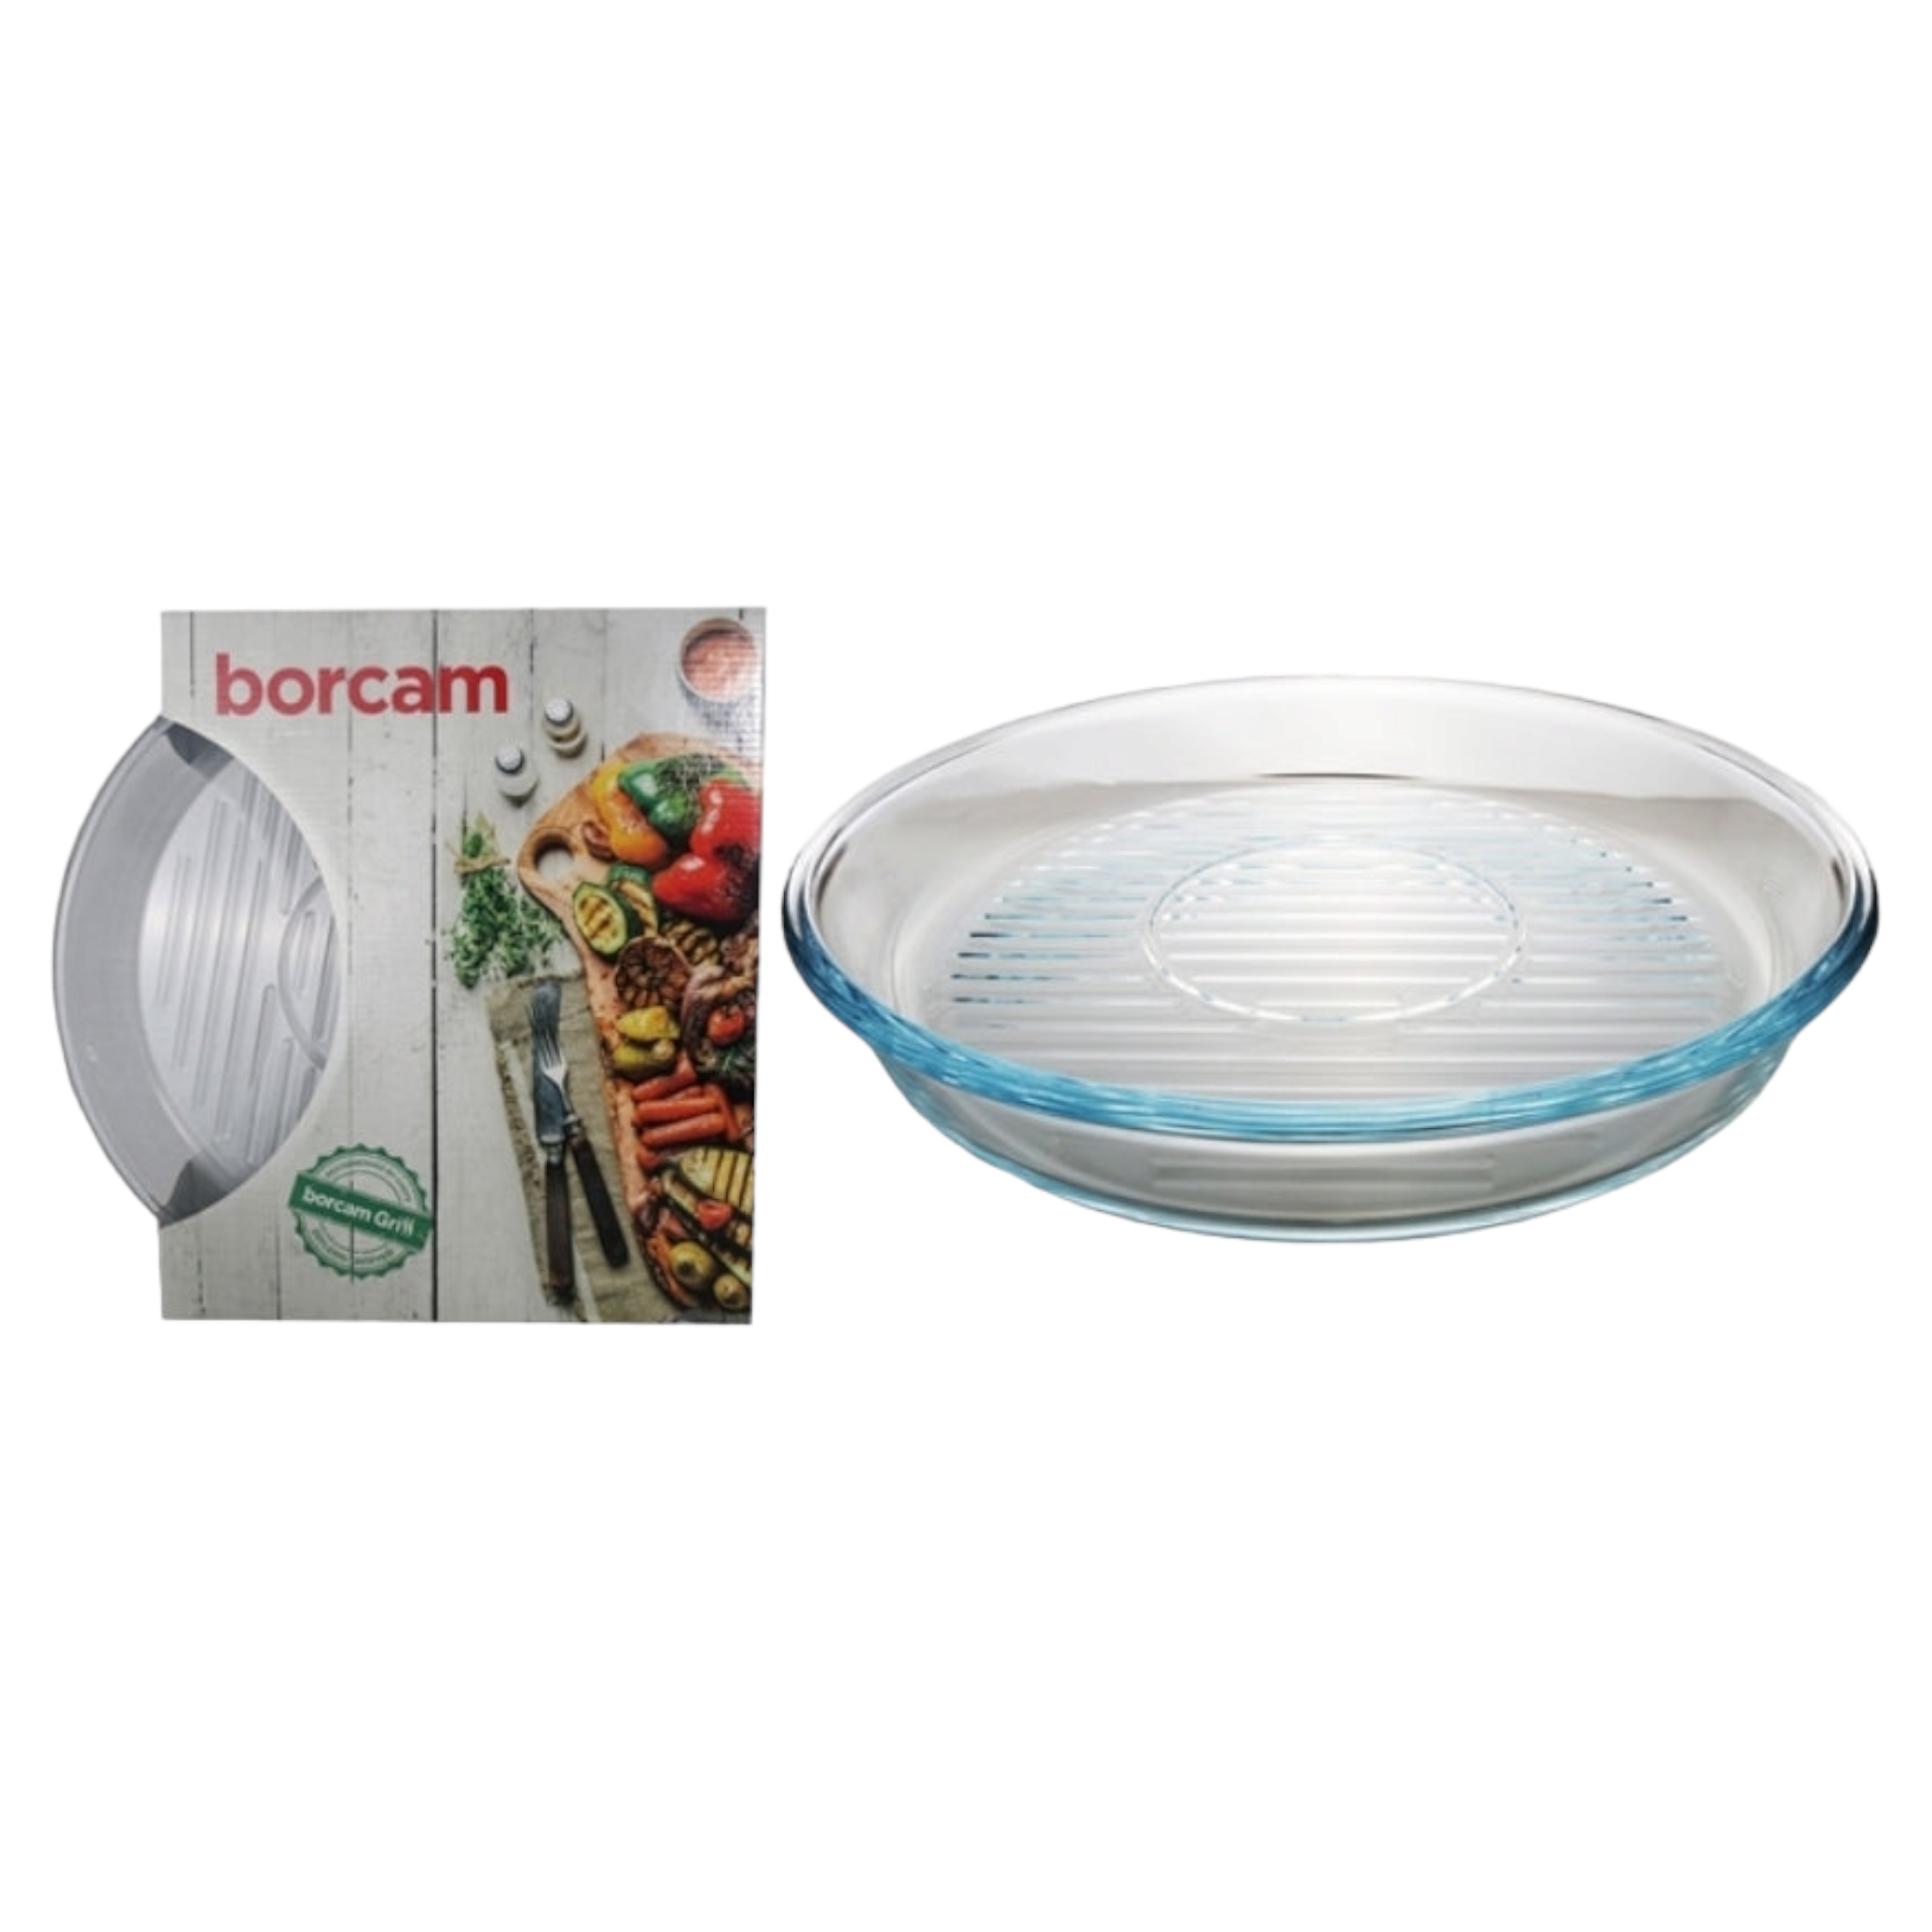 Borcam Glass Serving Dish Tray Grill Round 318.5mm 23308